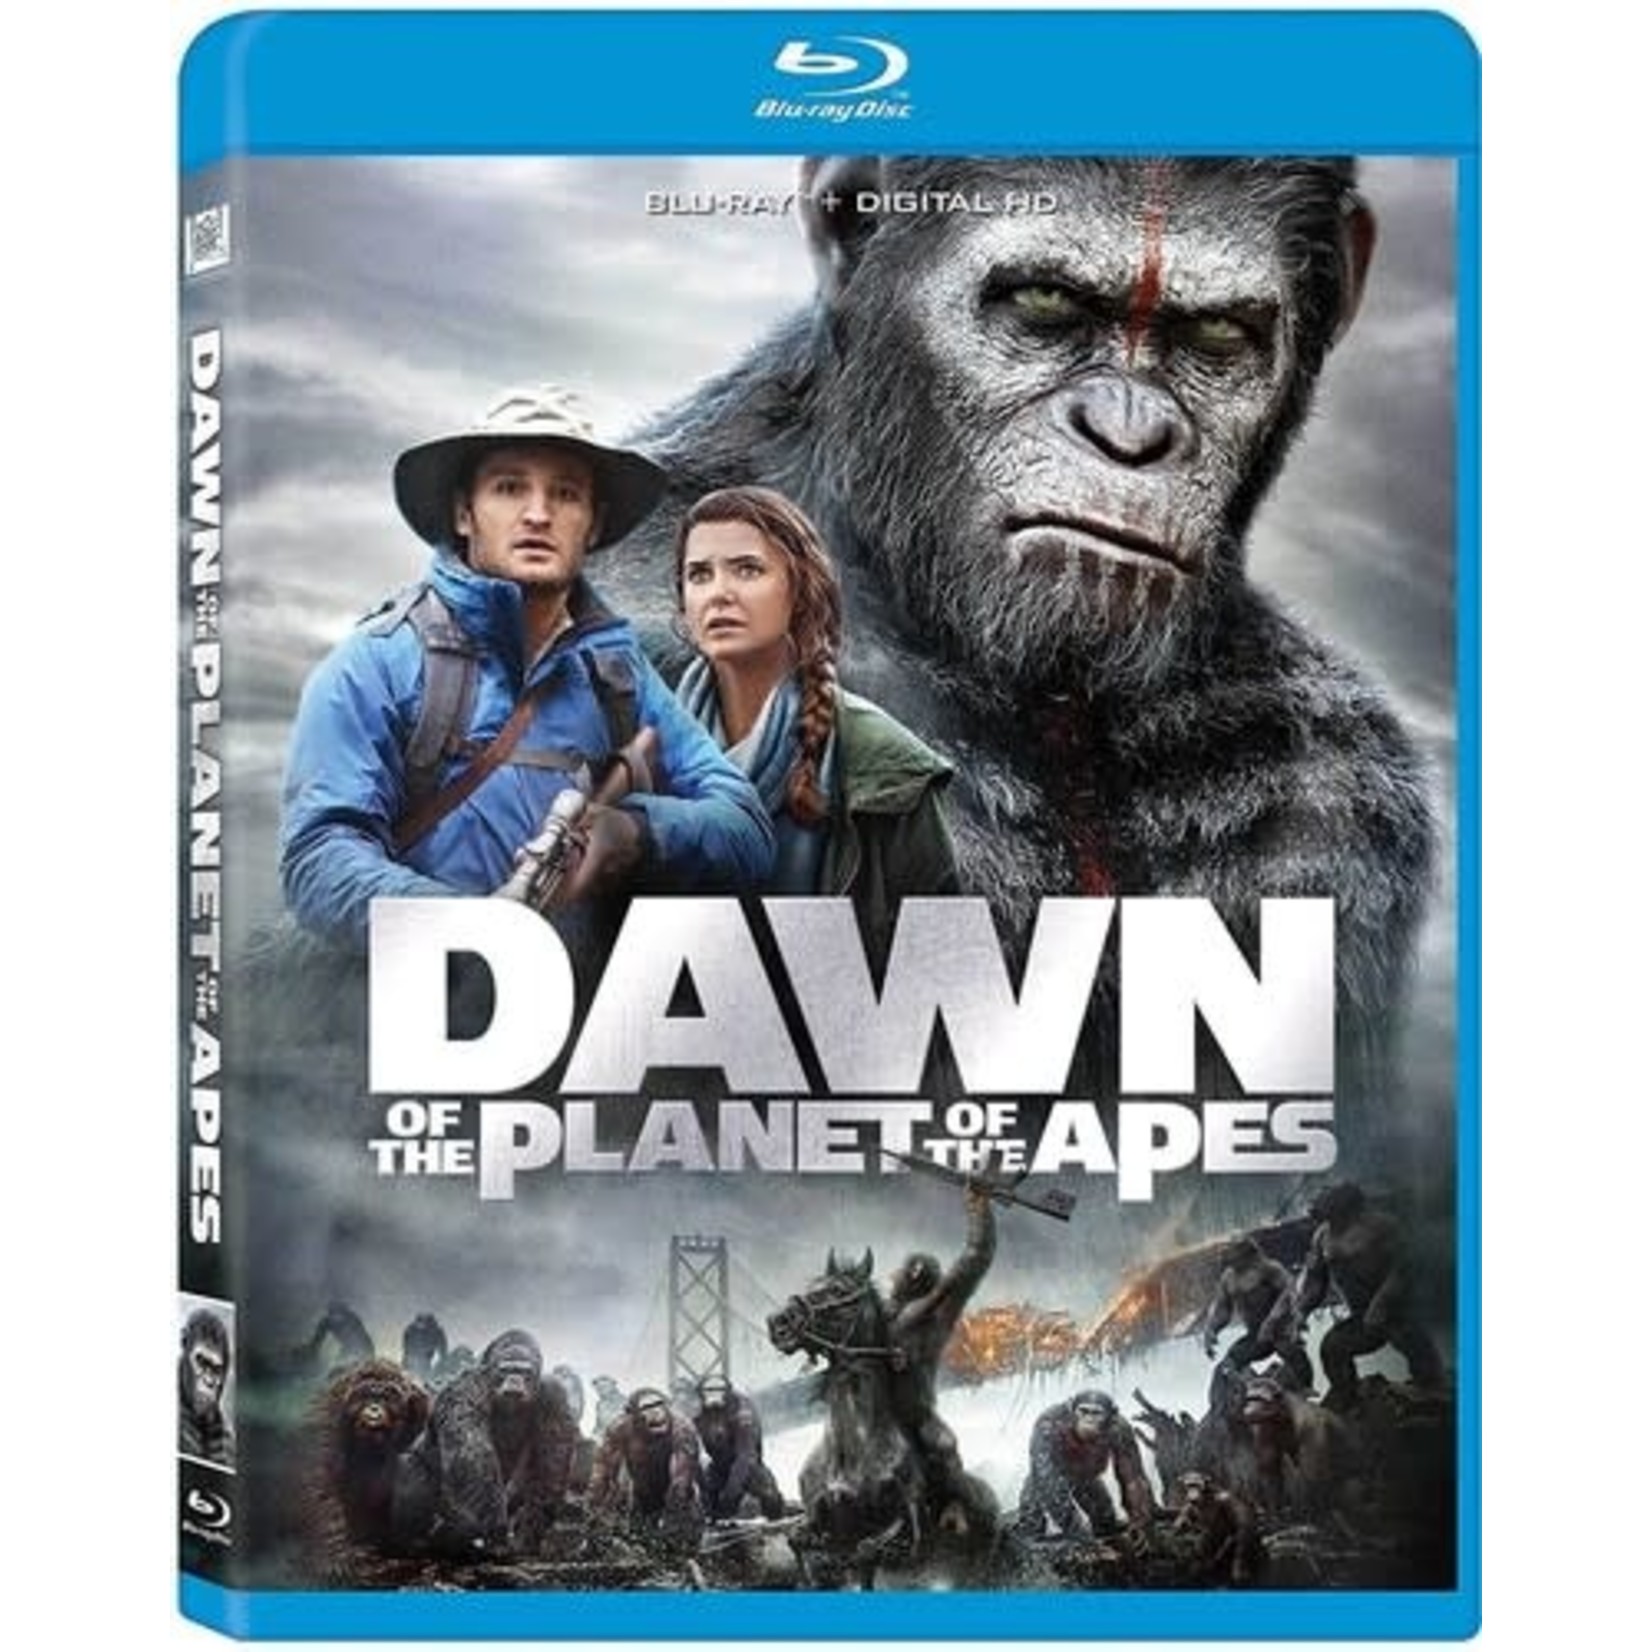 Planet Of The Apes (Reboot) 2: Dawn Of The Planet Of The Apes [USED BRD]